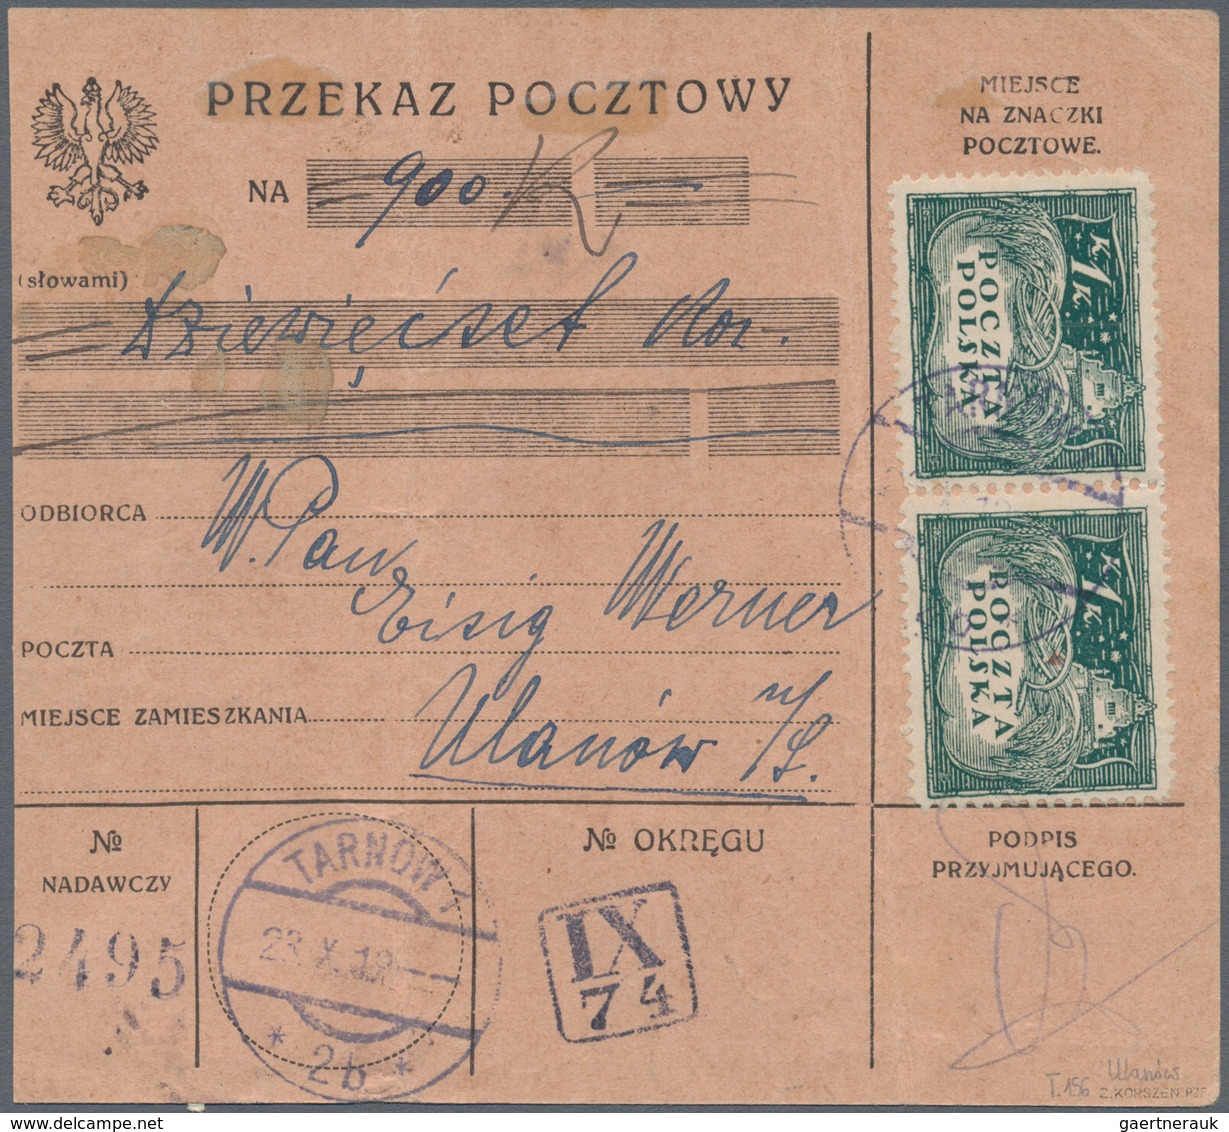 Polen - Lokalausgaben 1915/19: 1919/1923 (ca): 132 postal orders franked with postage due stamps fro